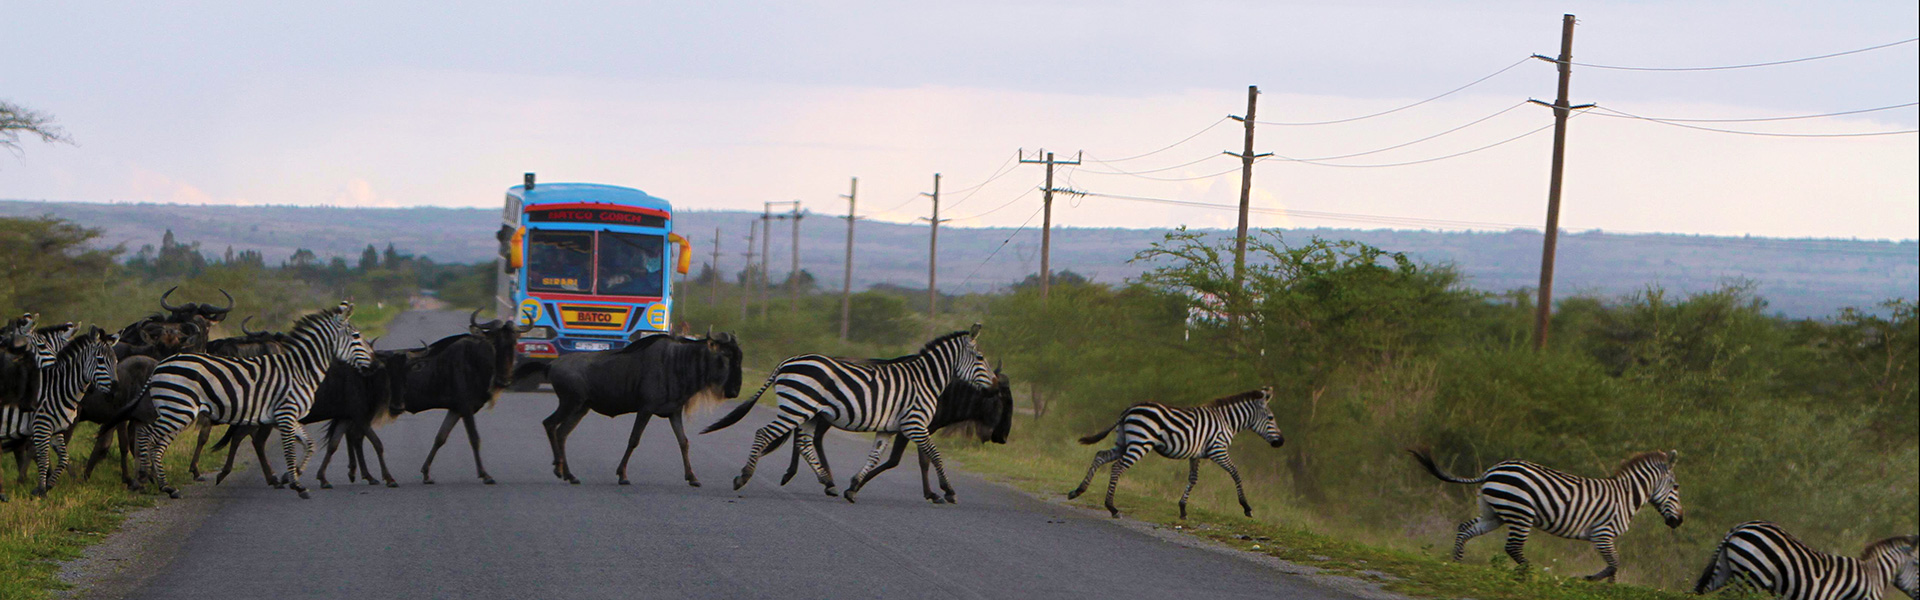 tanzania-road-crossing-zebras-and-wildebeest-in-front-of-bus